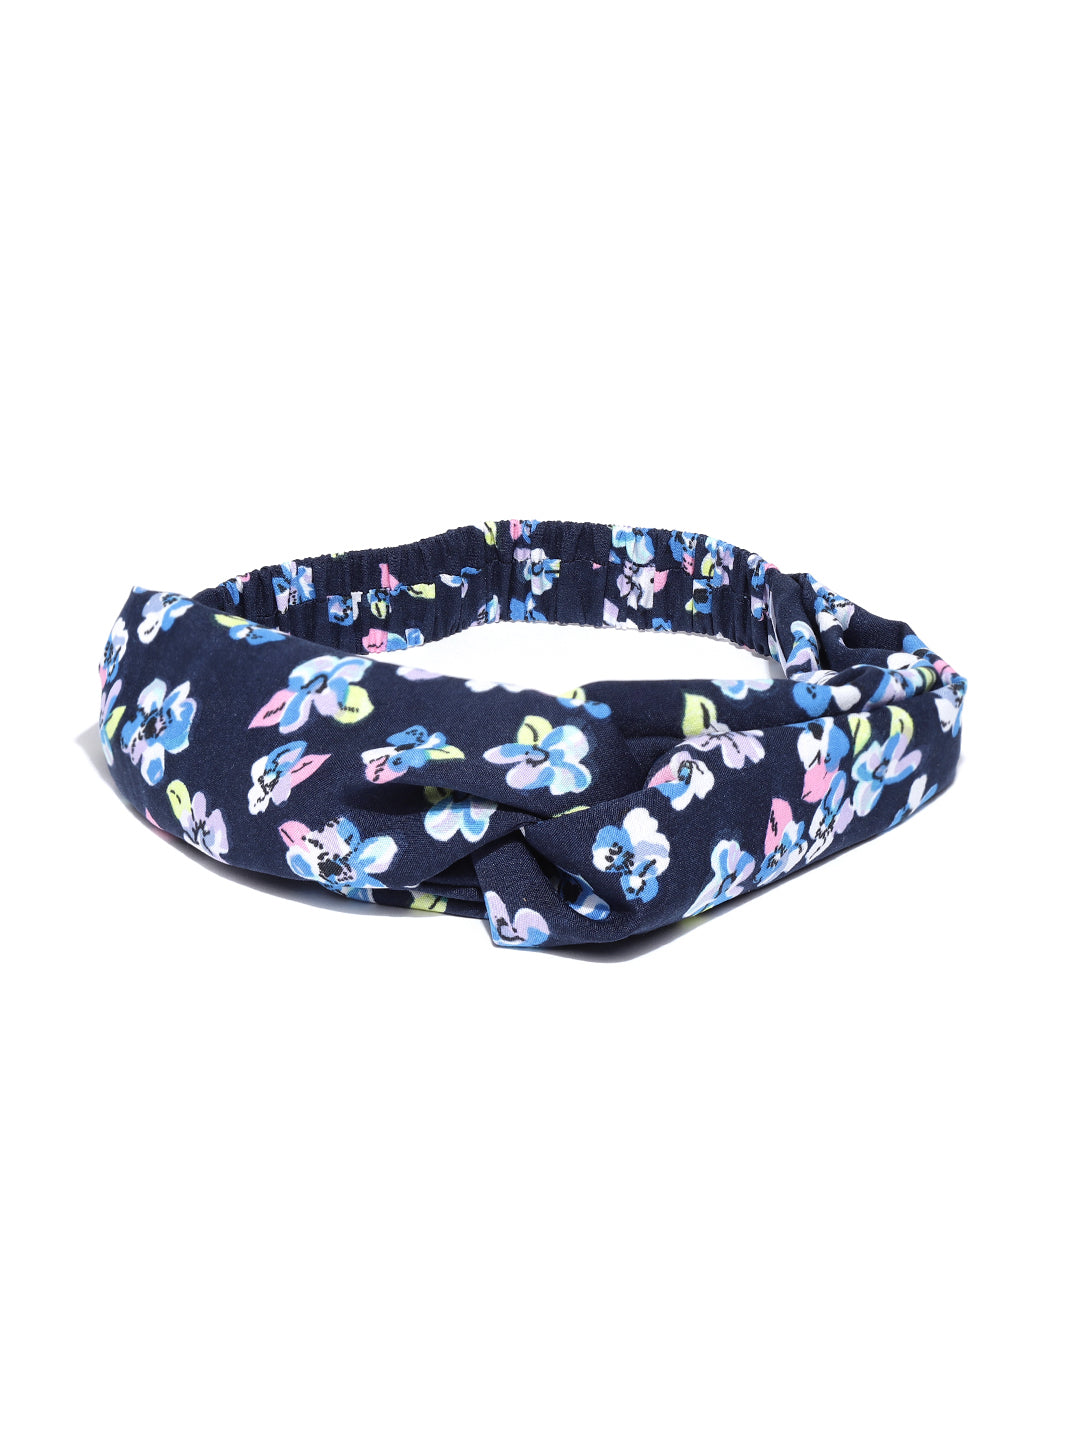 Blueberry multi colour floral print knoted hair band